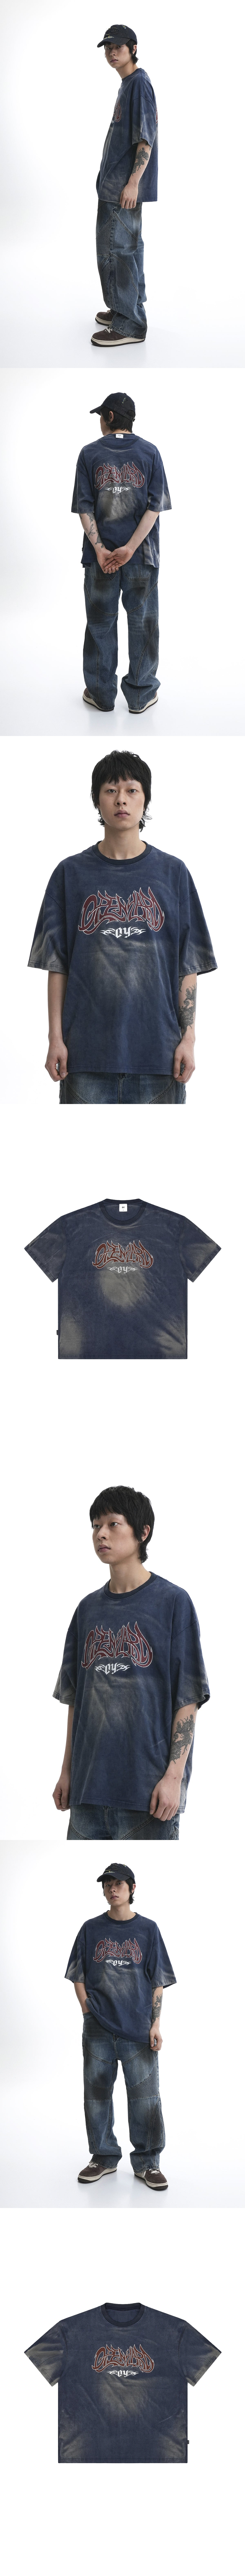 VINTAGE WASHED OPYD T-NAVY